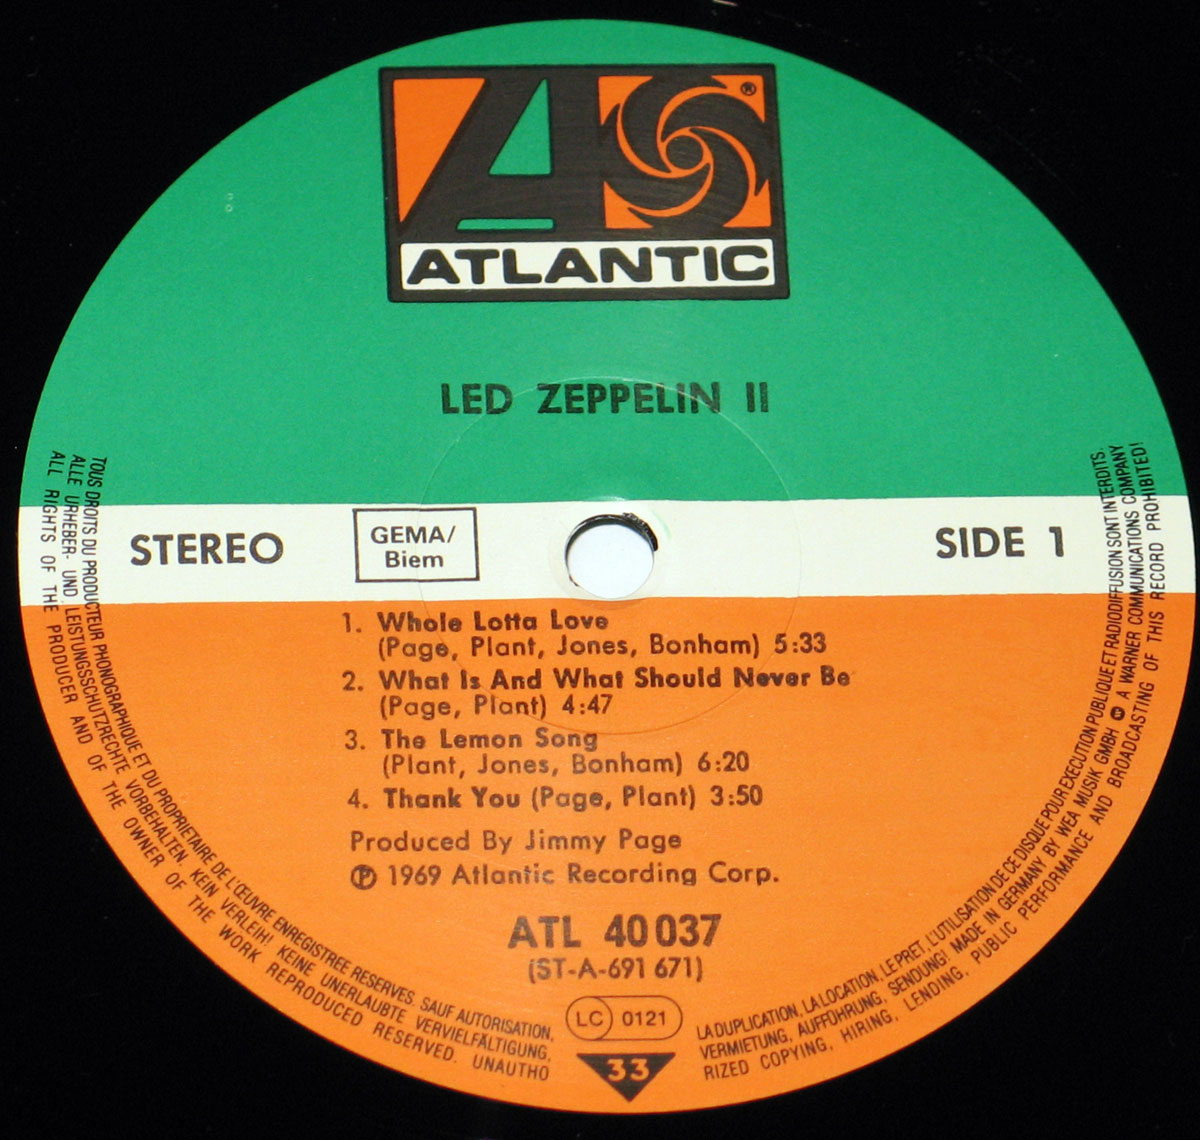 High Resolution Photo of Led Zeppelin II LP 